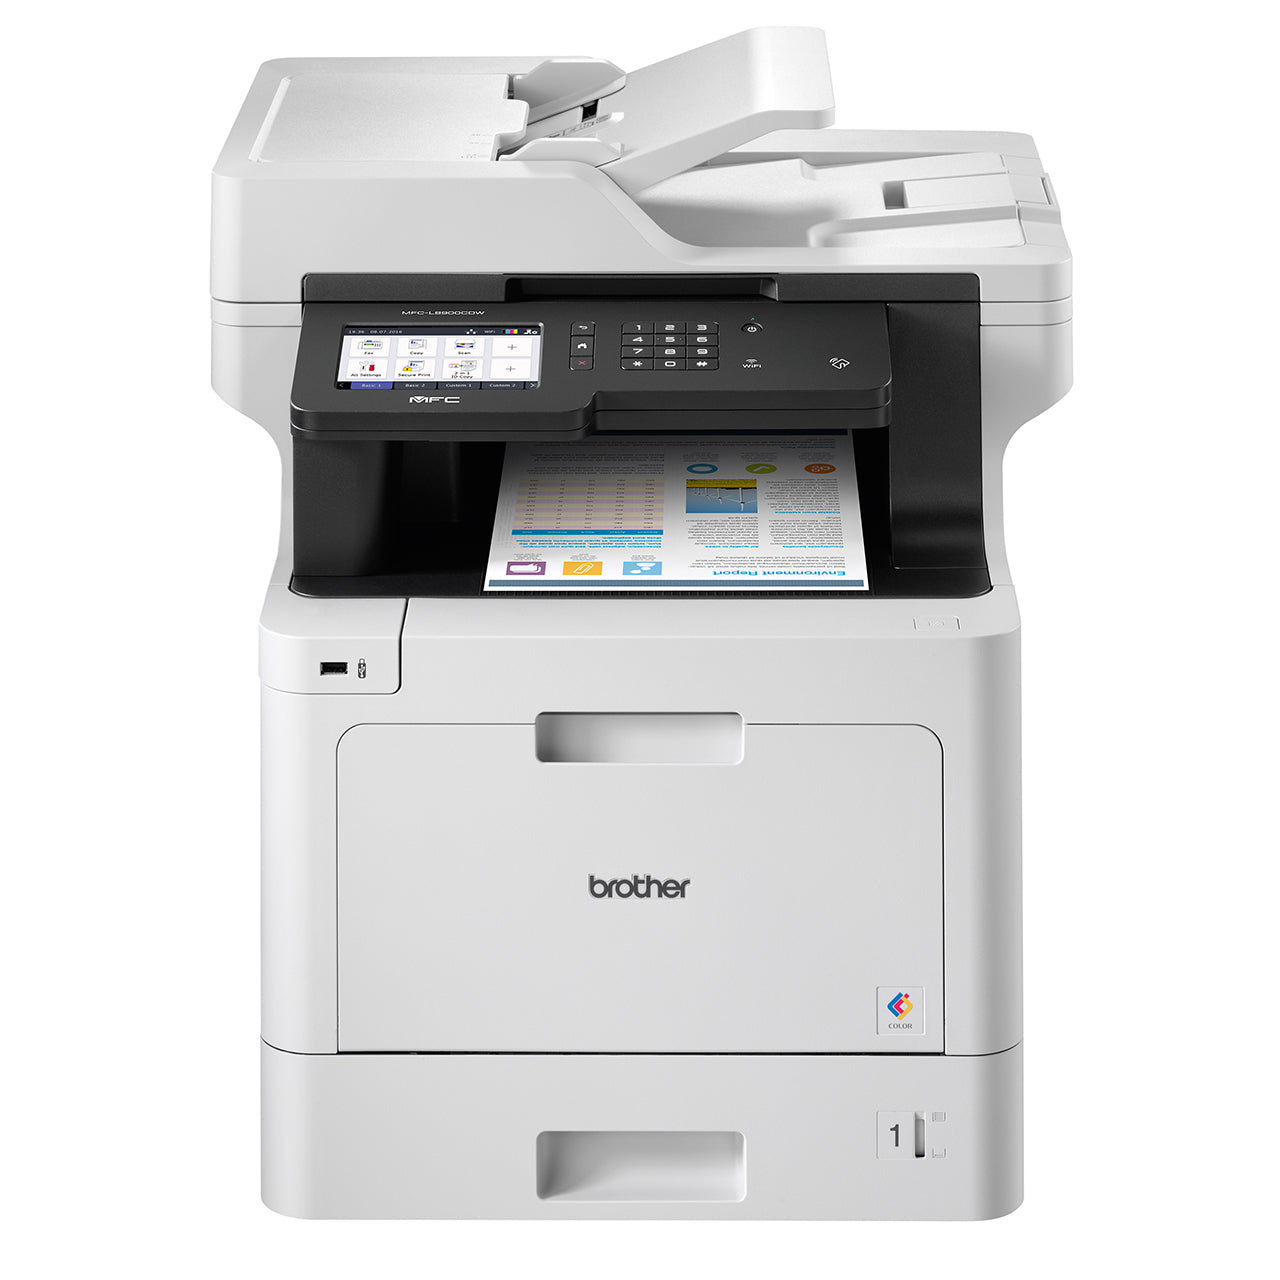 Brother MFC-L8900CDW All-in-One Colored Laser Printer with Print, Scan, Copy and Fax, Duplex Printing, 5" TFT Color LCD with Wireless Networking and NFC Card Reader for Business and Office Use